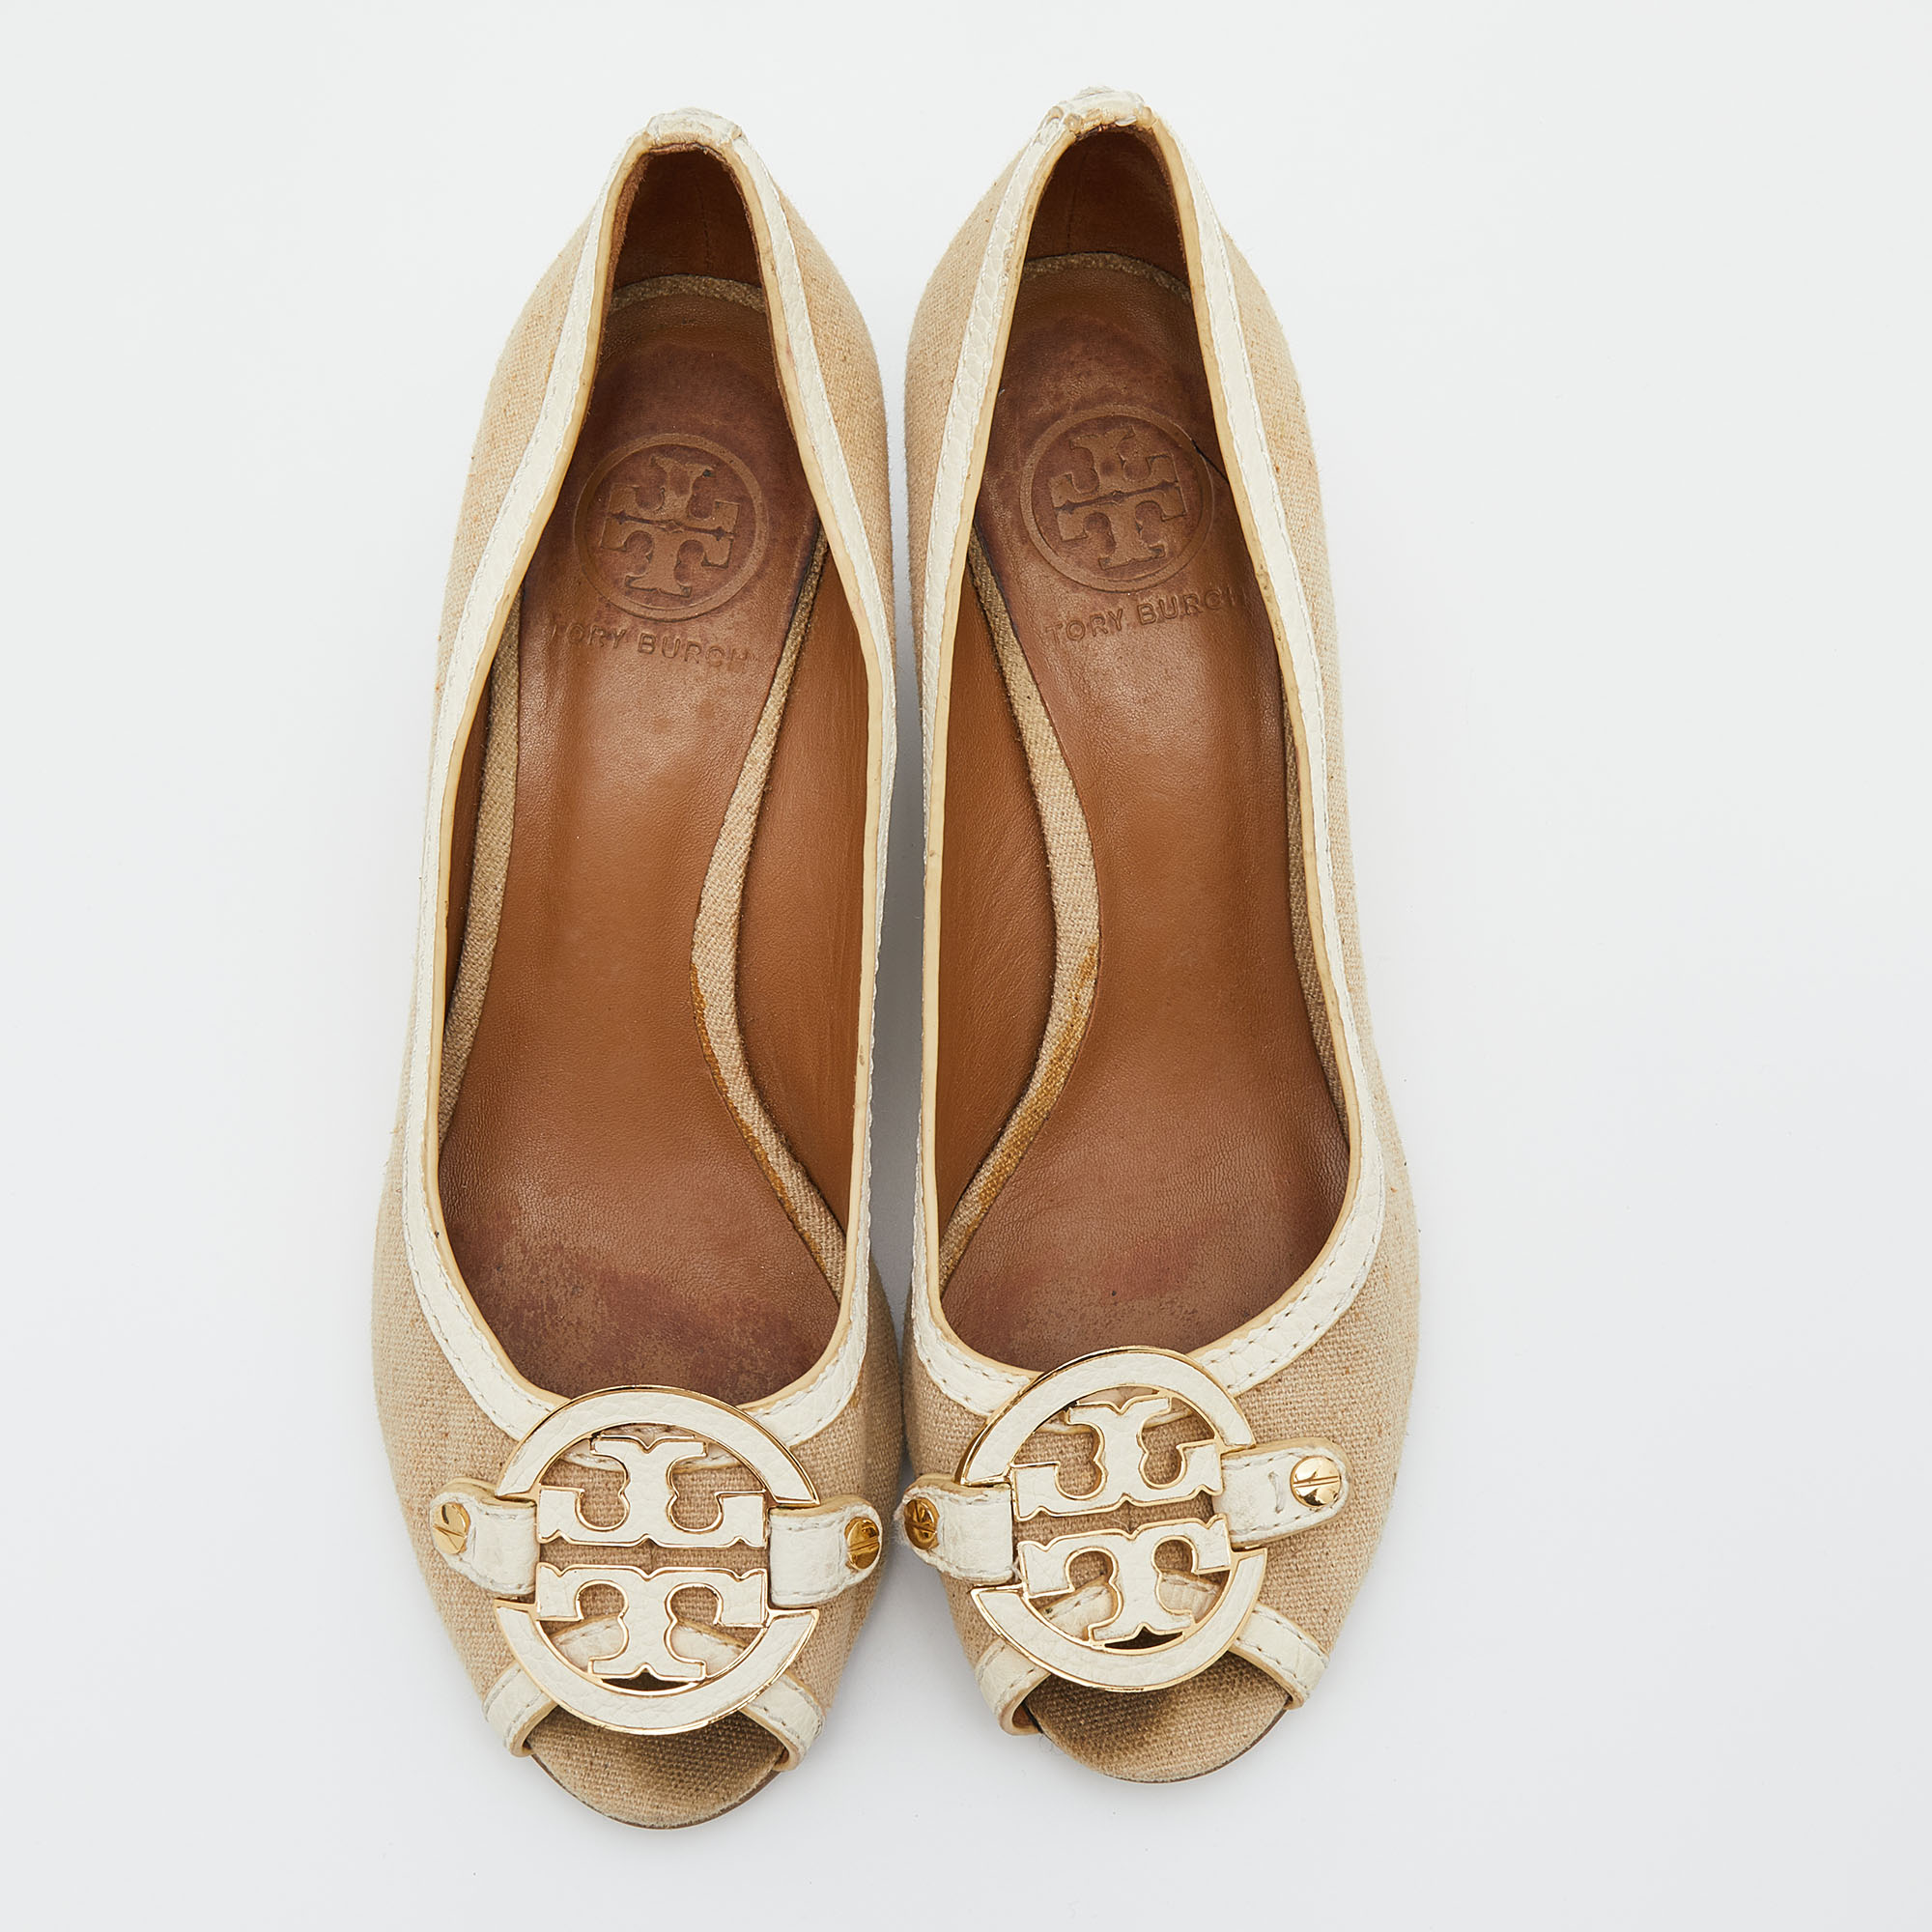 Tory Burch Beige/White Canvas And Leather Amanda Peep Toe Wedge Pumps Size 38